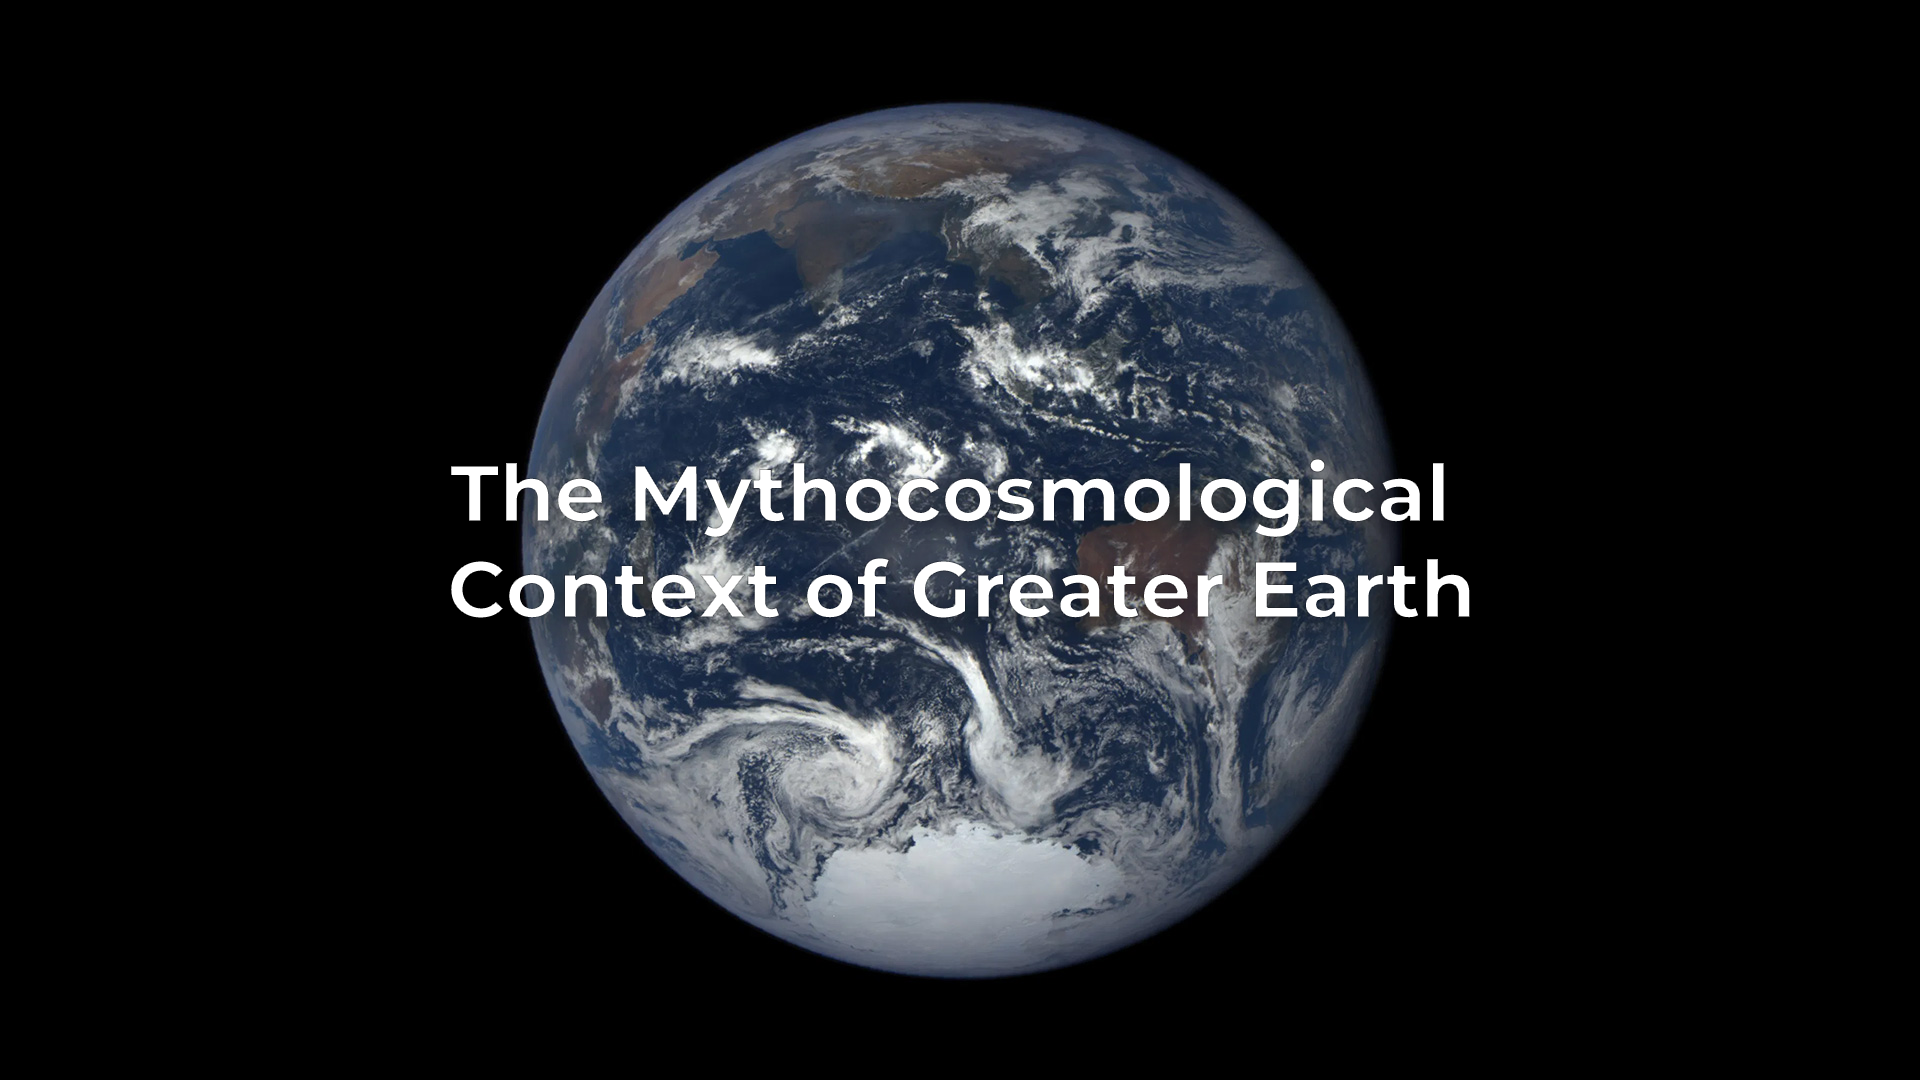 The Mythocosmological Context of Greater Earth